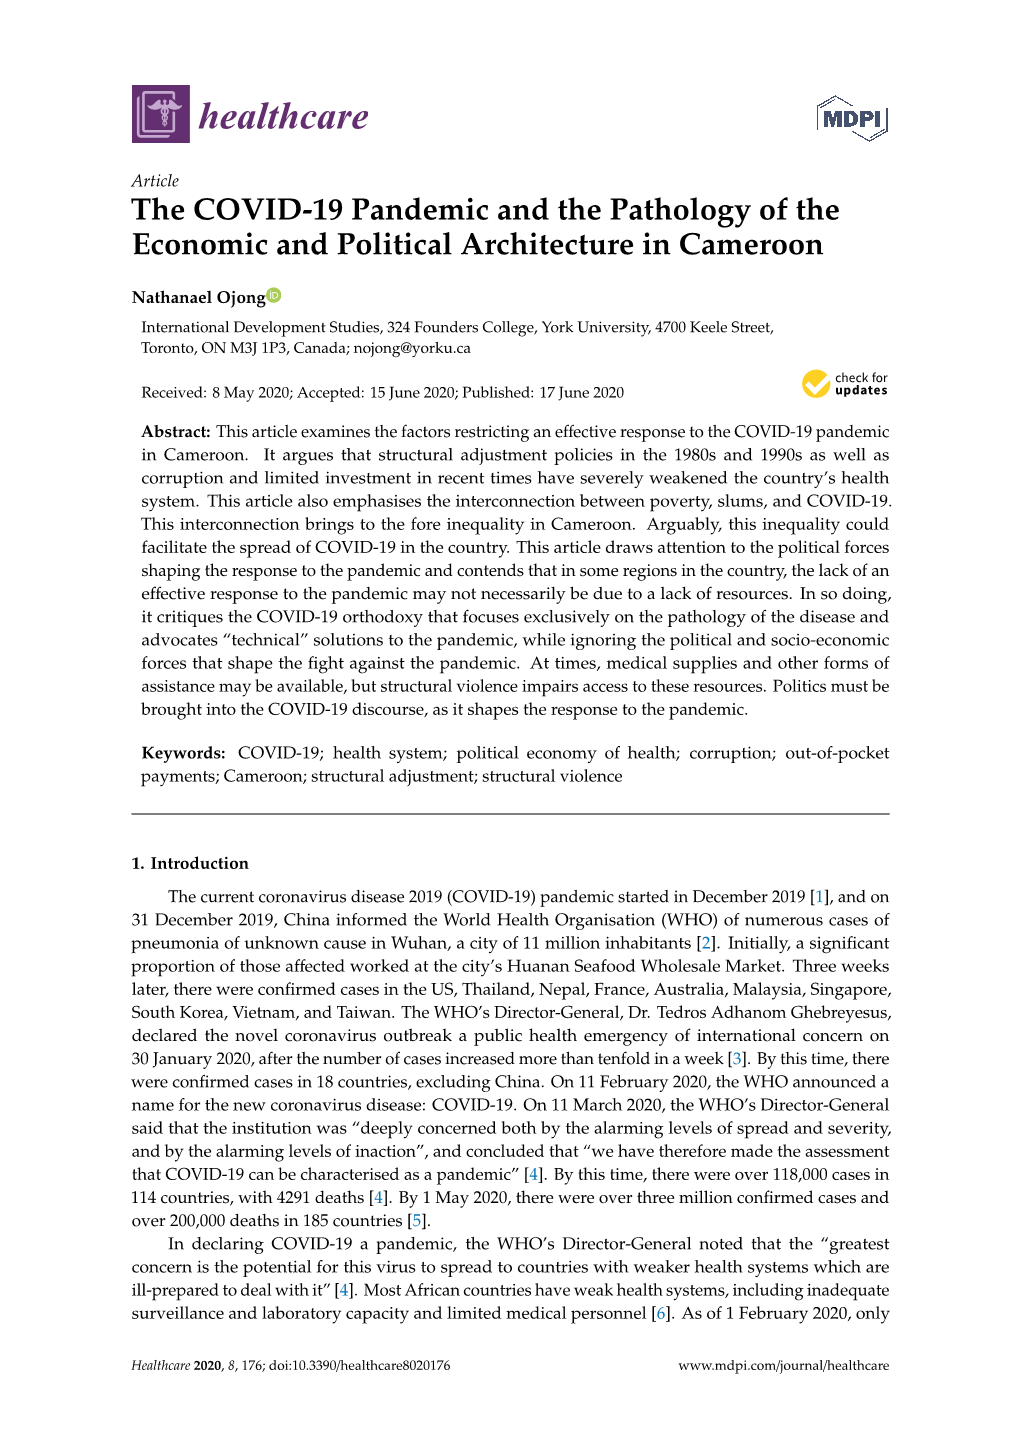 The COVID-19 Pandemic and the Pathology of the Economic and Political Architecture in Cameroon